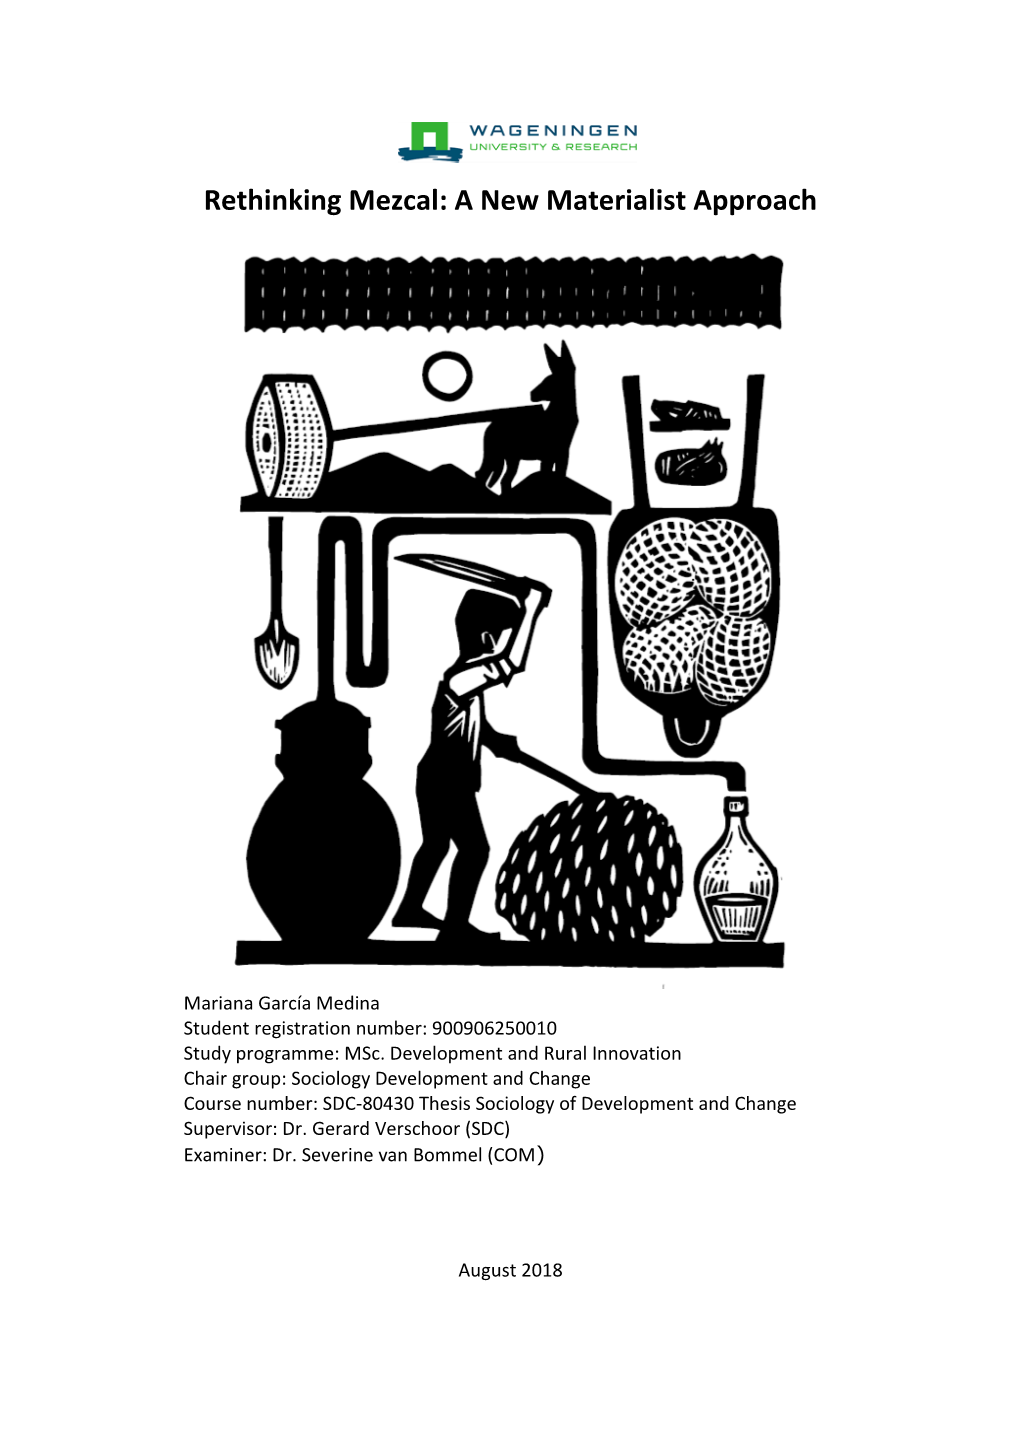 Rethinking Mezcal: a New Materialist Approach